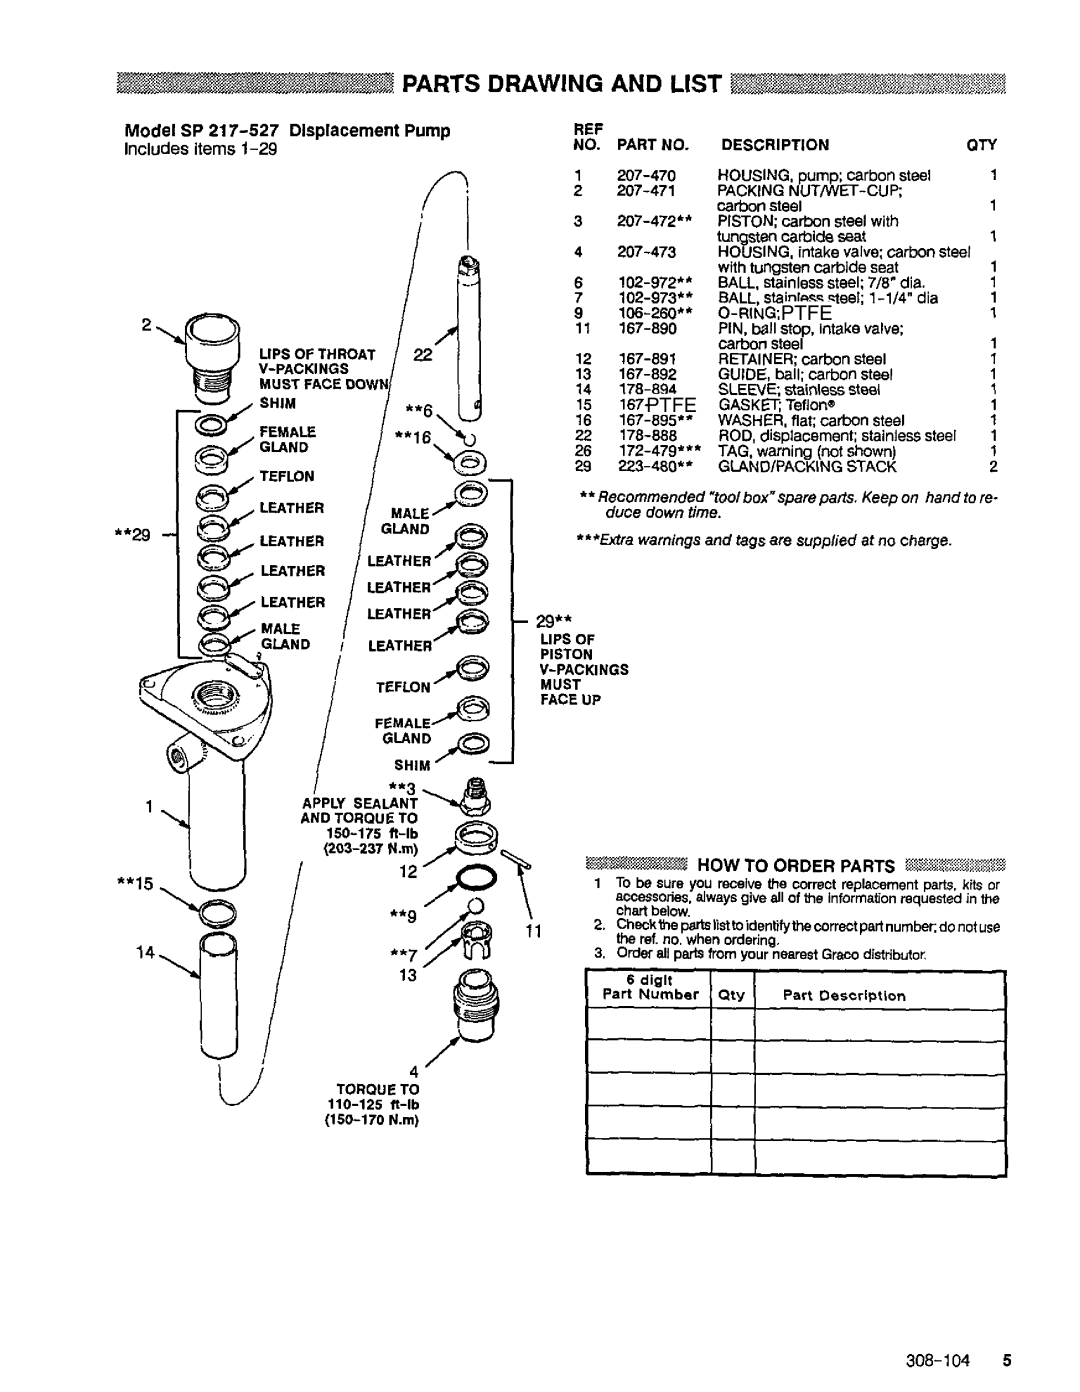 Graco SP 218-335 manual 308-104, Model SP, Dlsplacernent Pump, Parts Drawing And List ~, 106-260, 223-480*’ 